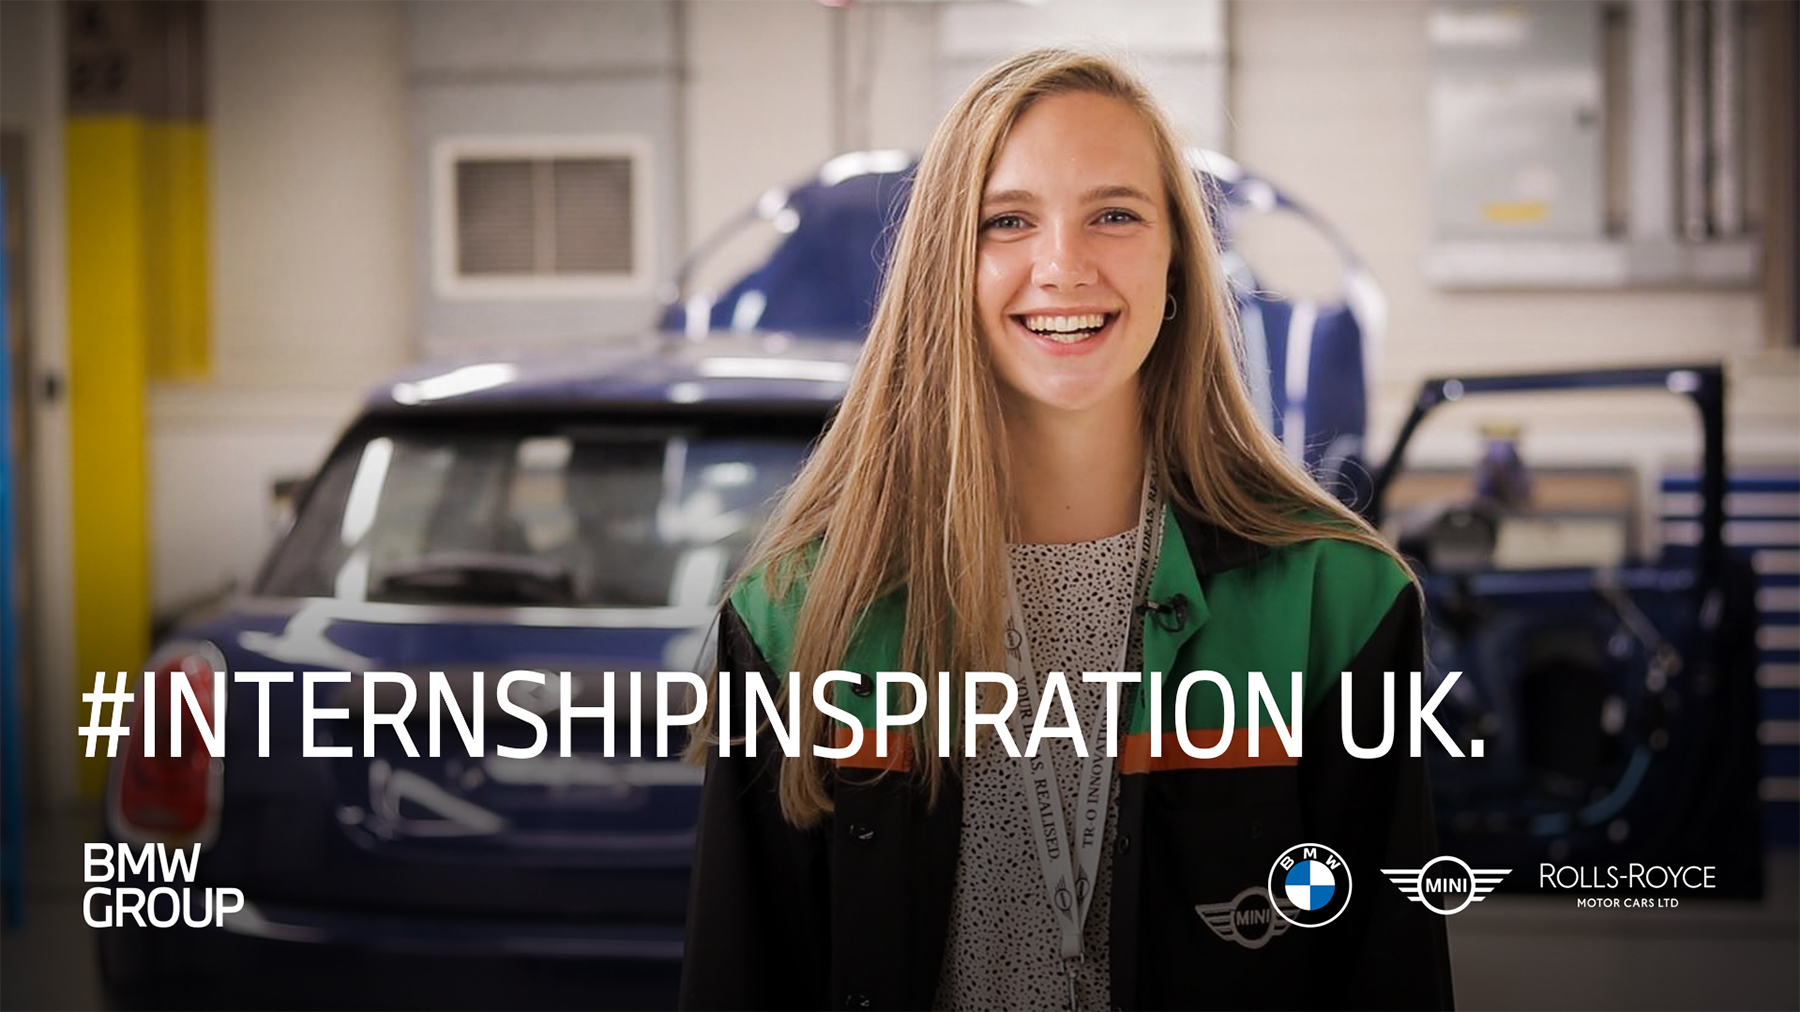 The video shows your oppurtunities at BMW Group as a student.